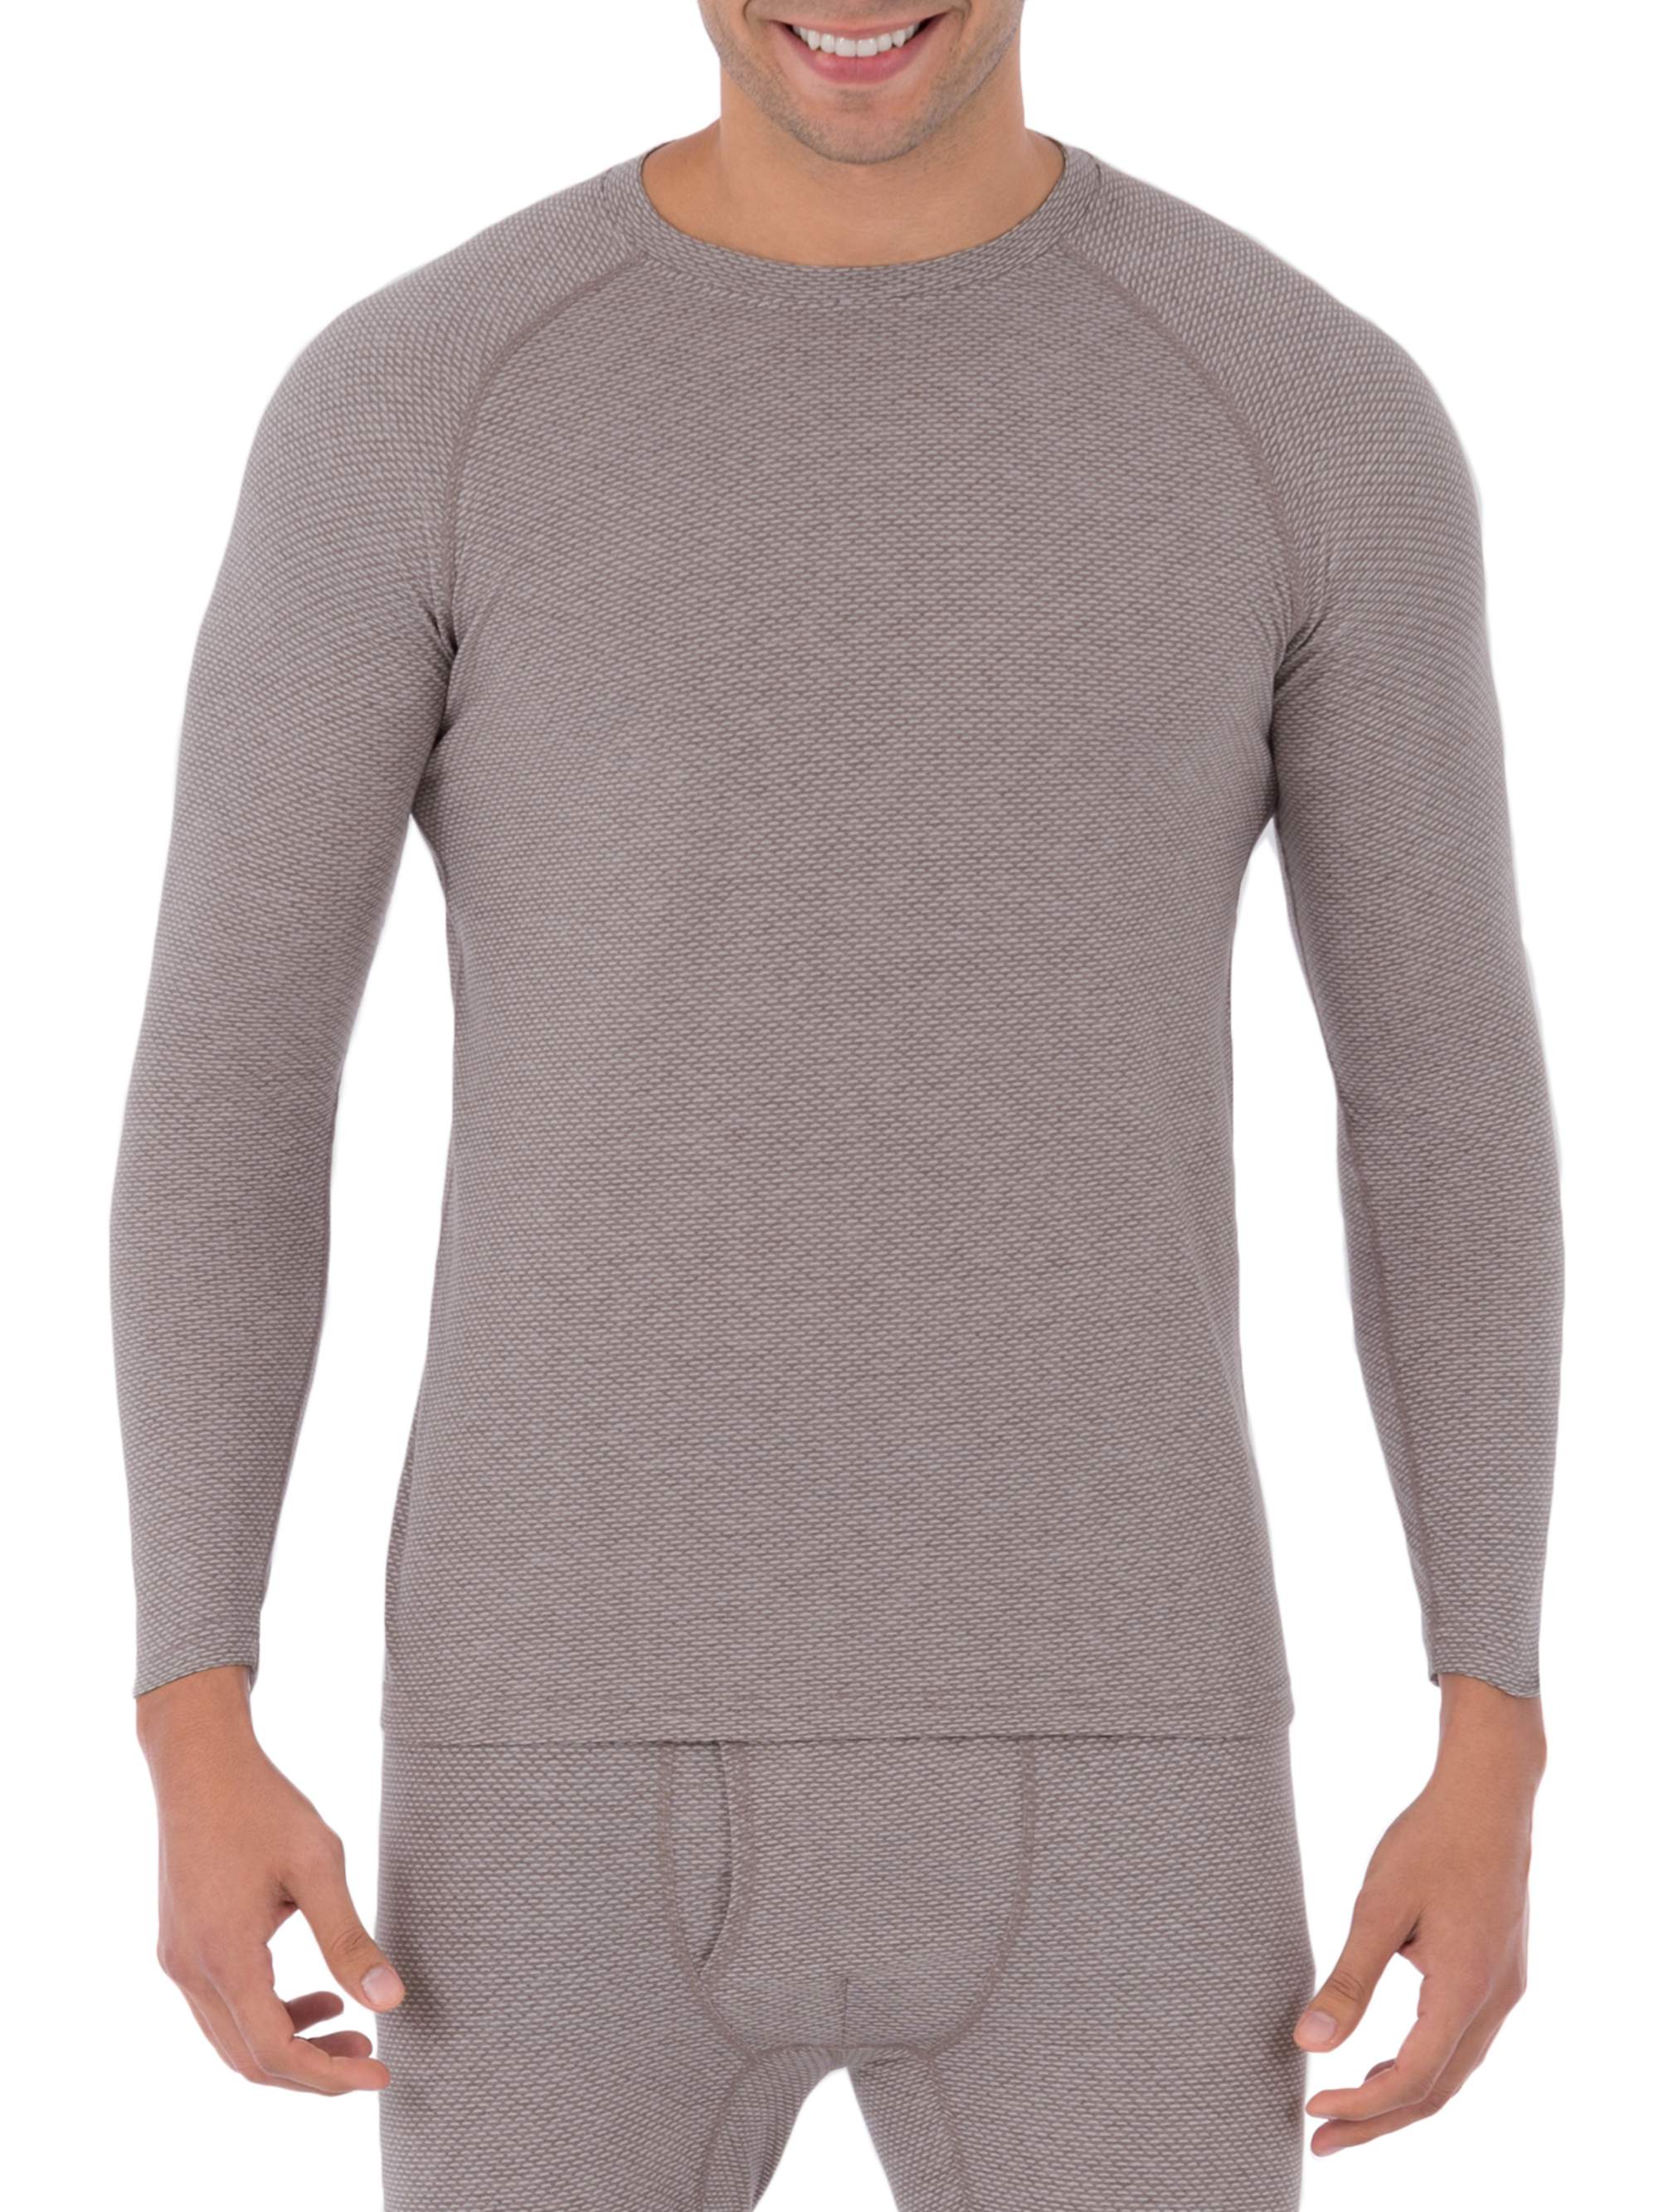 Fruit of the Loom Big Men's Breathable Super Cozy Thermal Shirt Underwear for Men - image 1 of 5